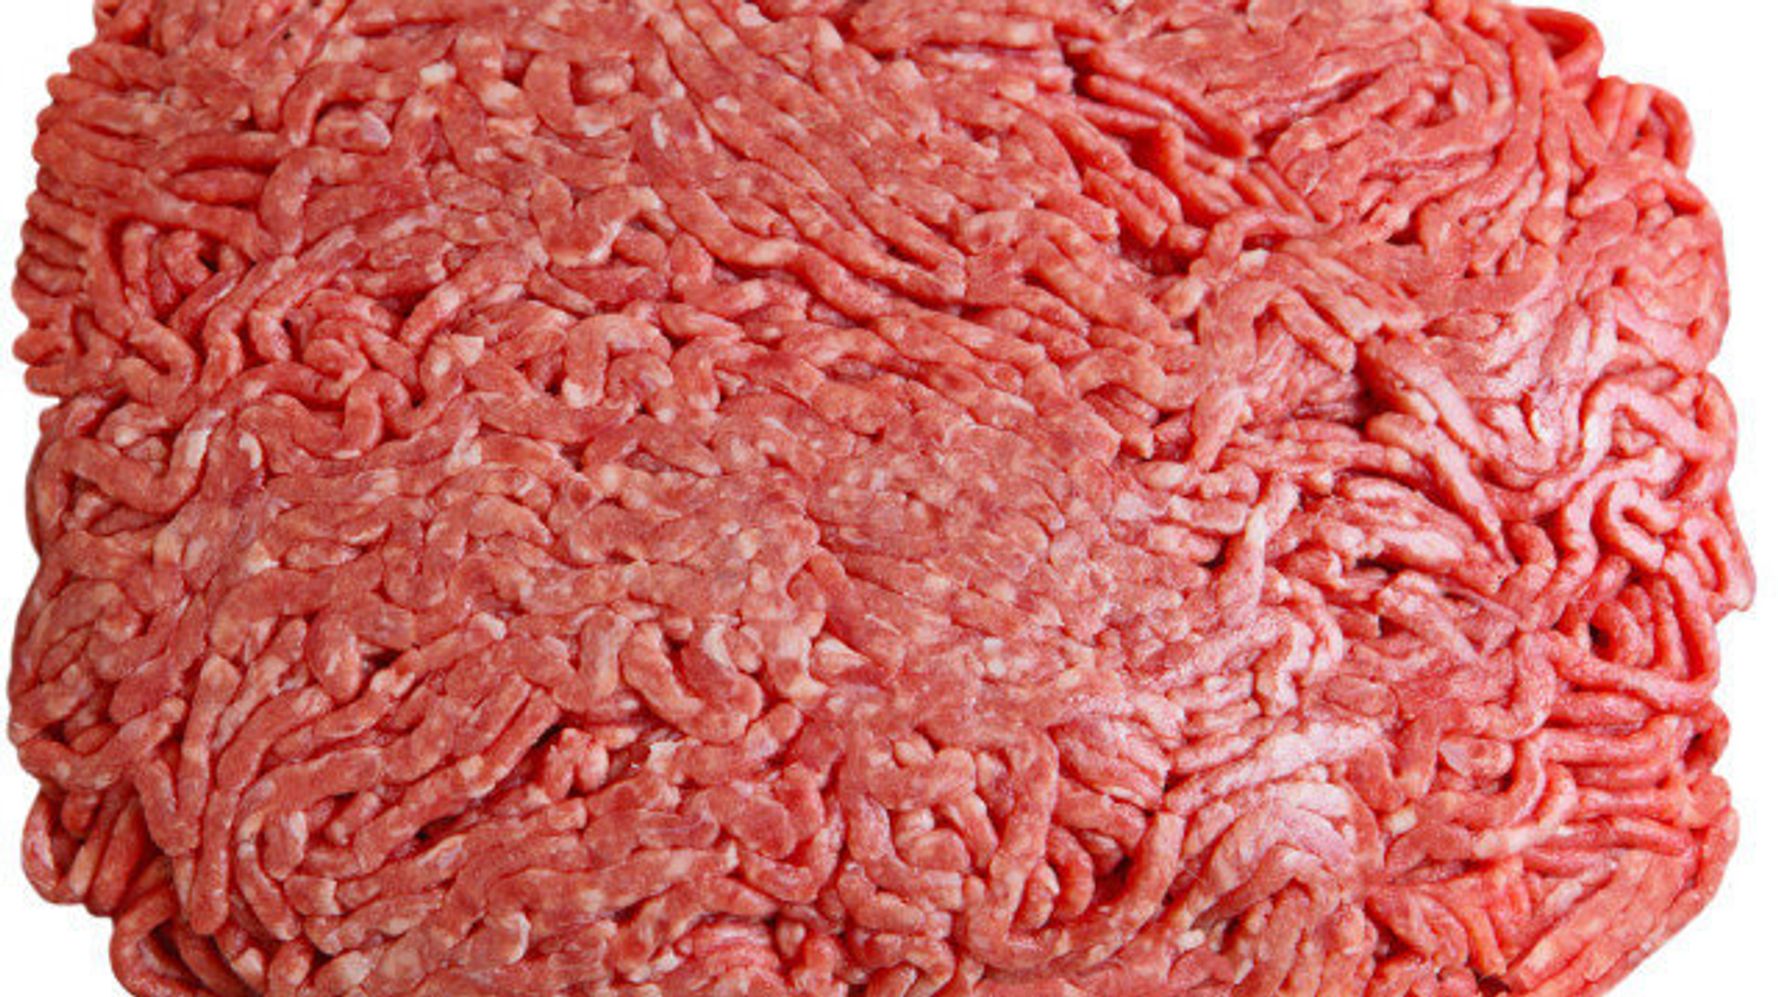 XL Foods Ground Beef Recall: Beef In E. Coli Scare Sold Across Canada ...